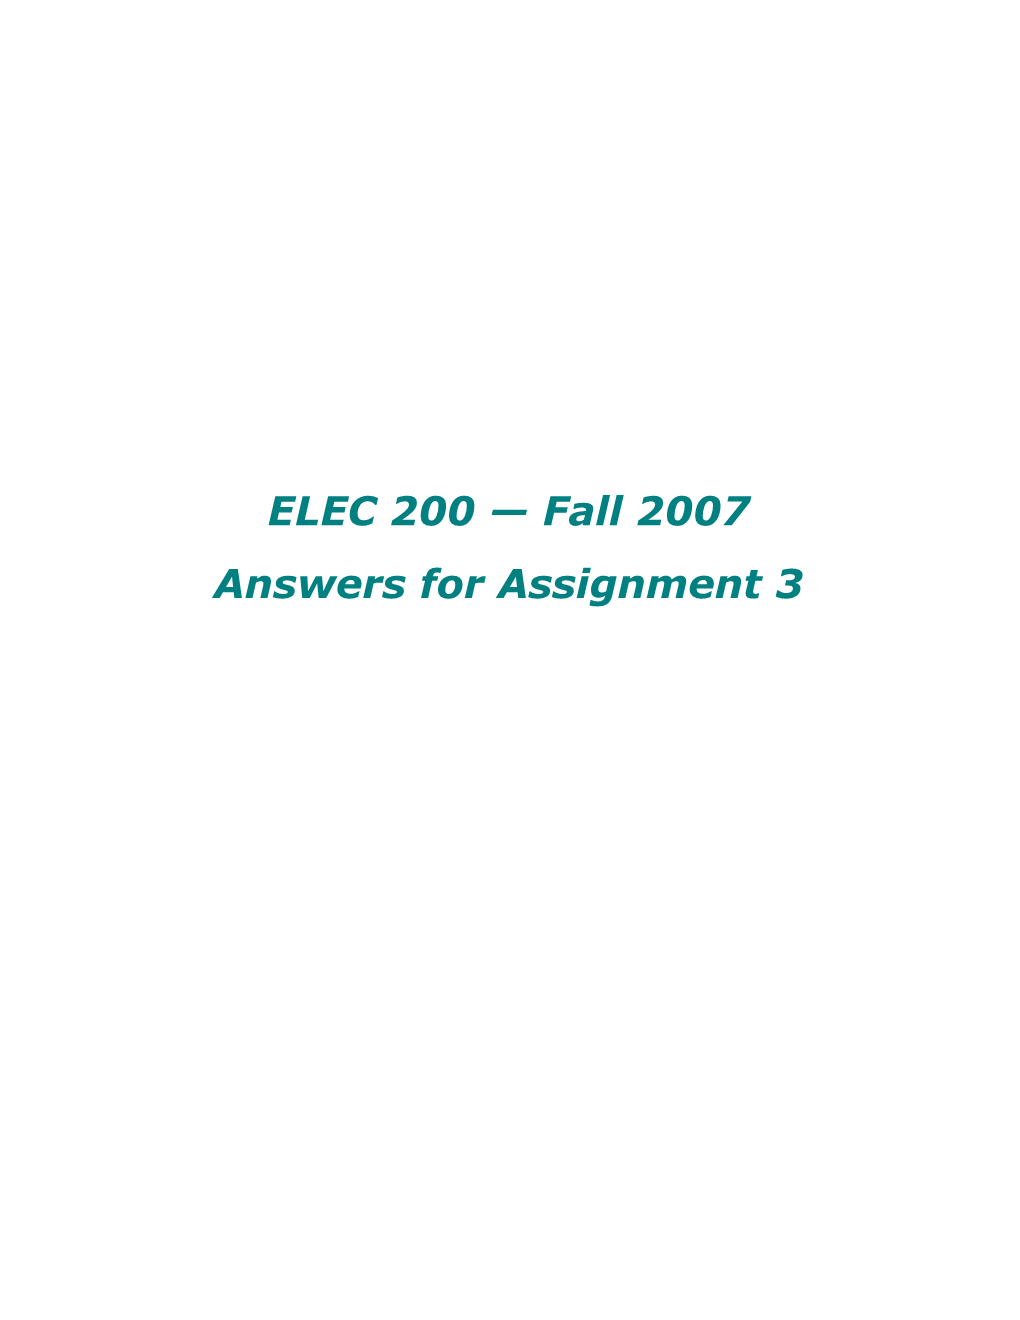 Answers for Assignment 3